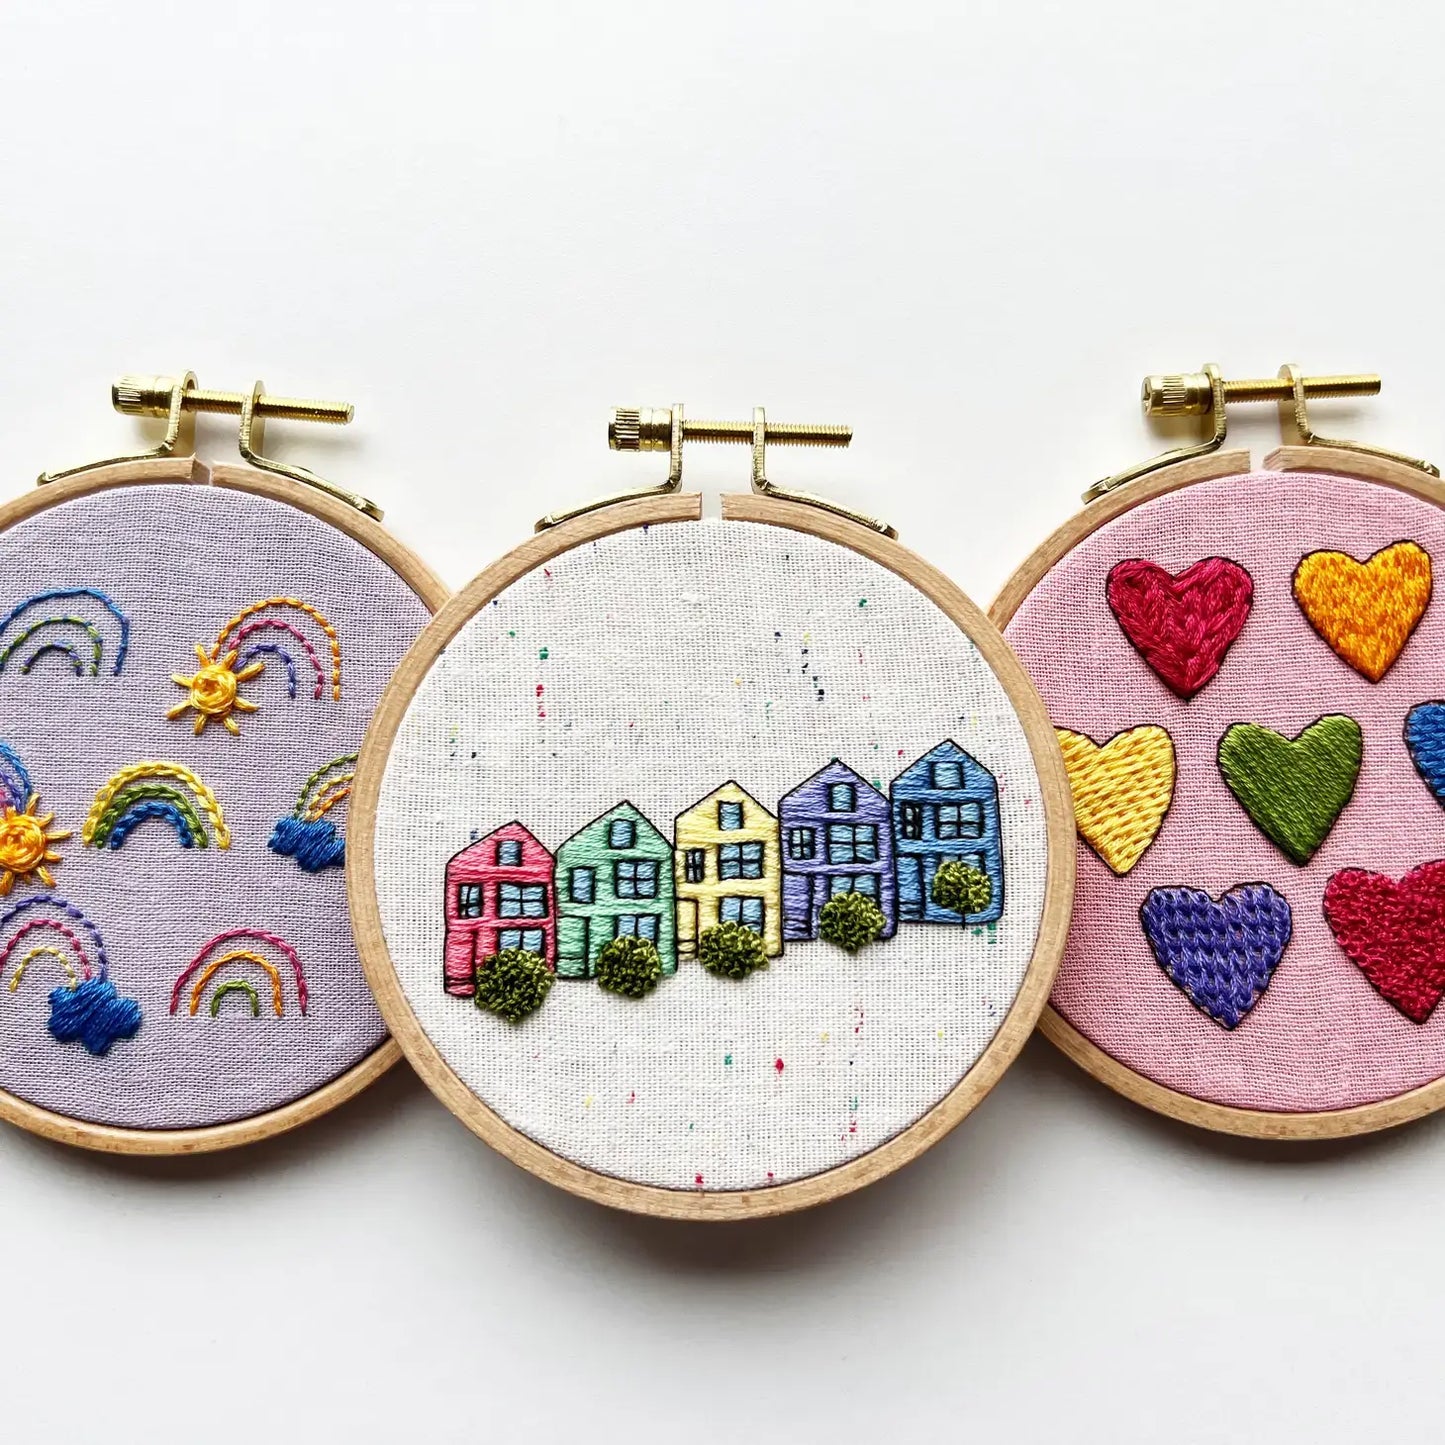 Learn 7 Hand Embroidery Stitches with Sunshines & Rainbows Kit